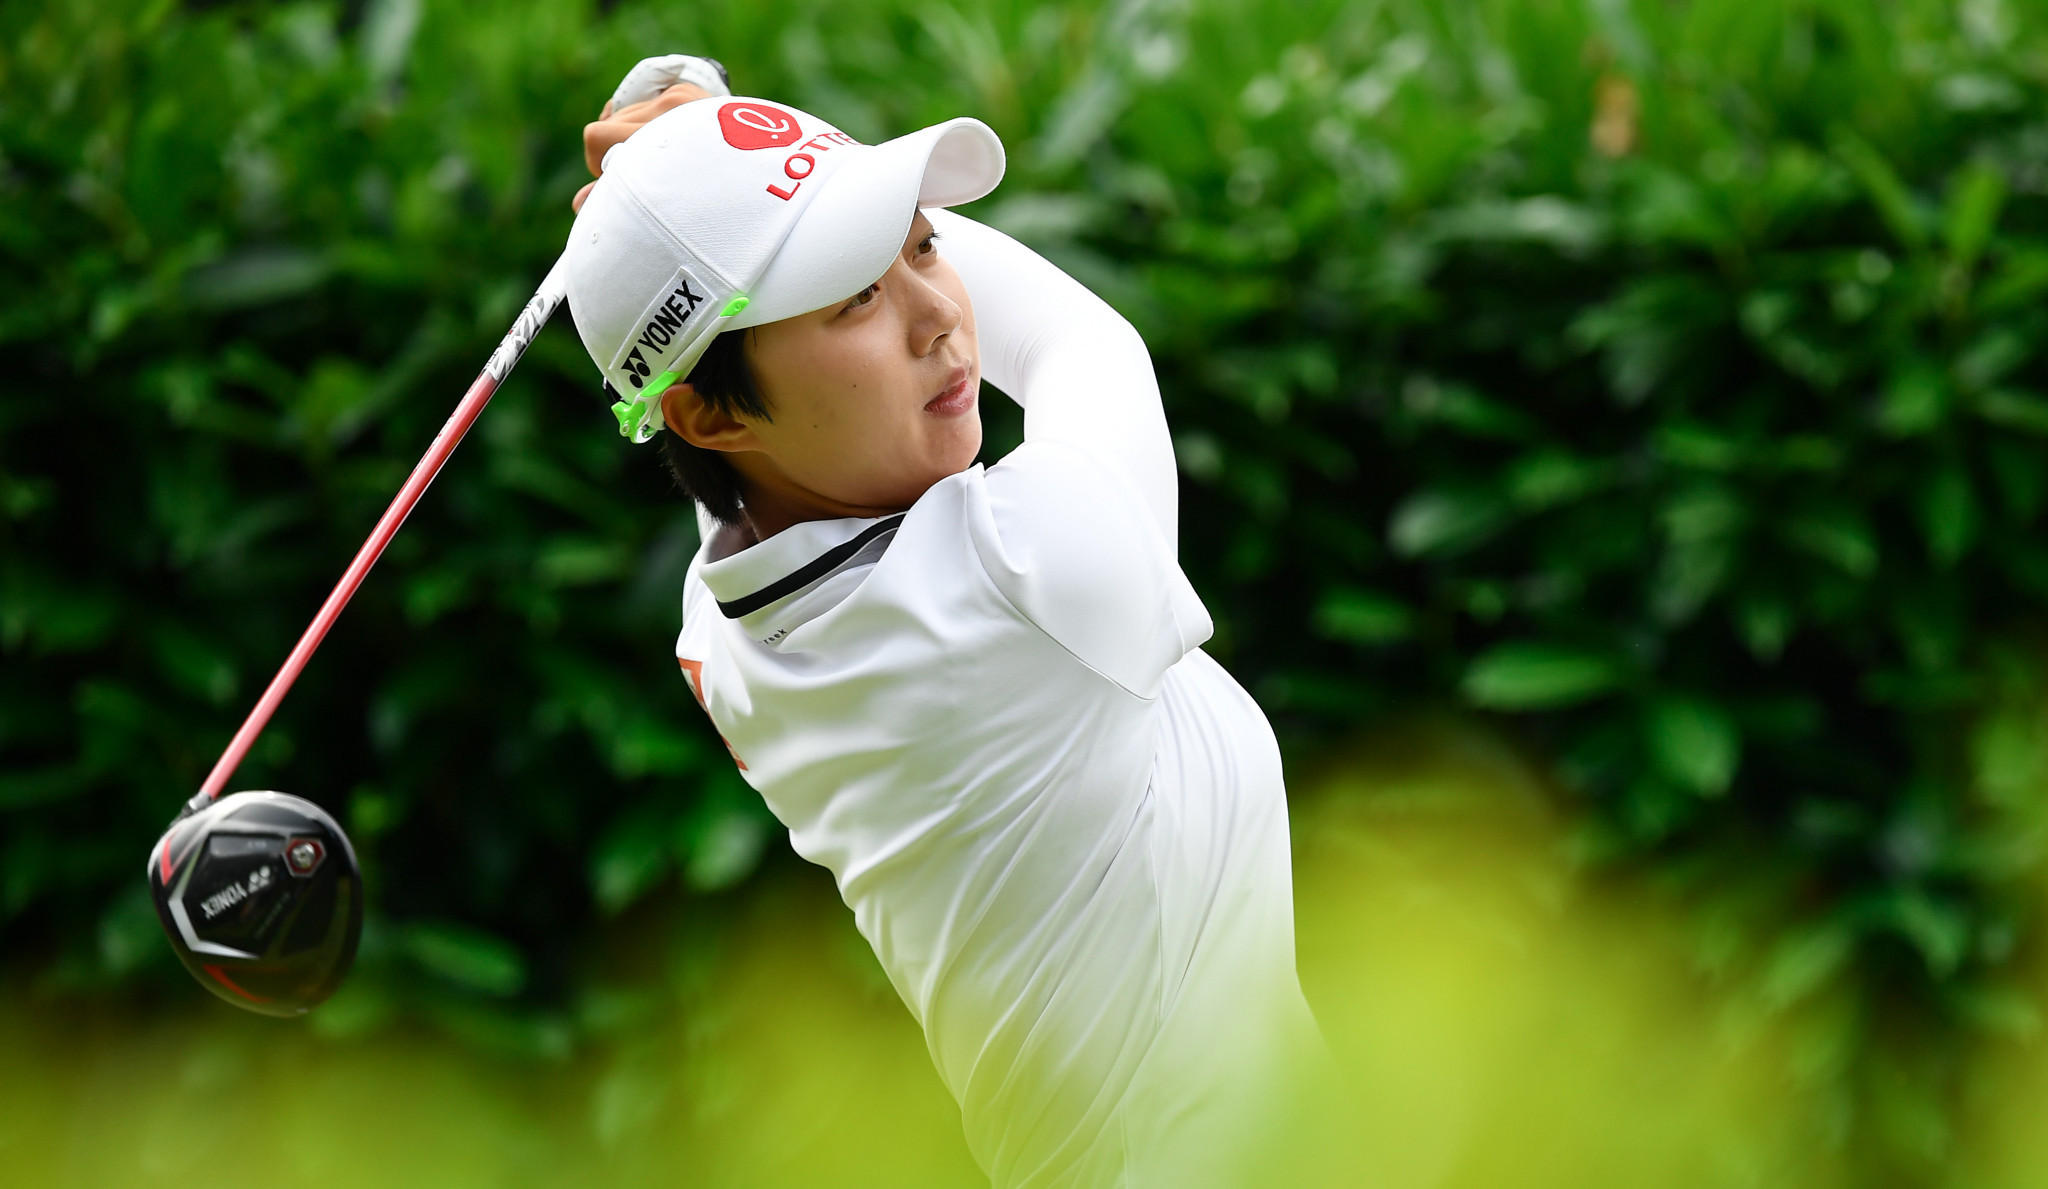 South Korea's Kim Hyo-joo shot a 65 today to take over the lead of the Evian Championship by one shot going into tomorrow's final day ©Getty Images